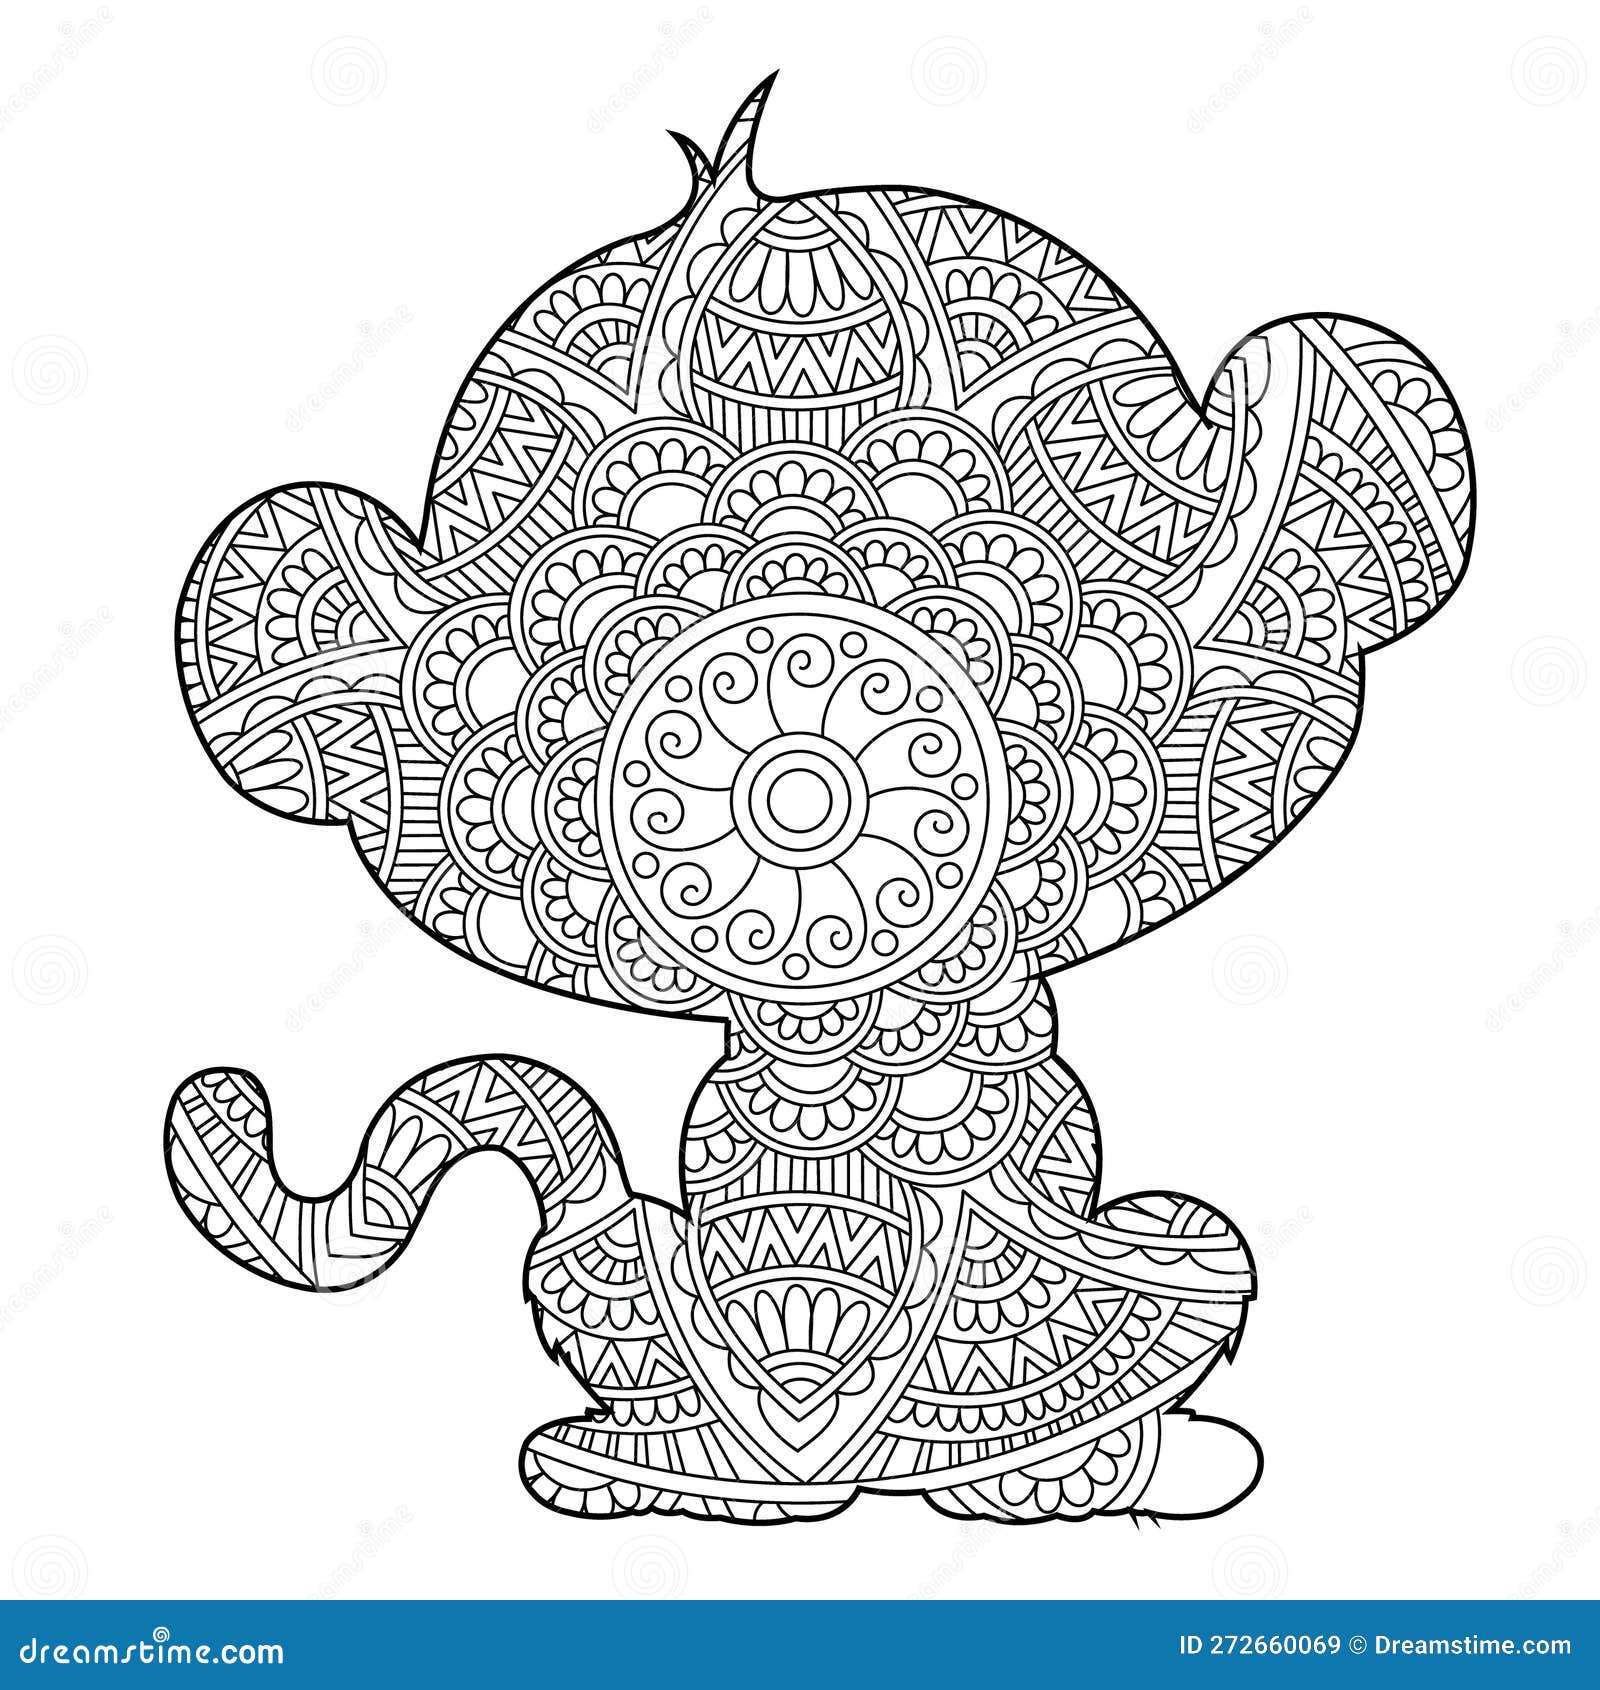 Zentangle monkey mandala coloring page for adults animal coloring book antistress coloring page stock vector